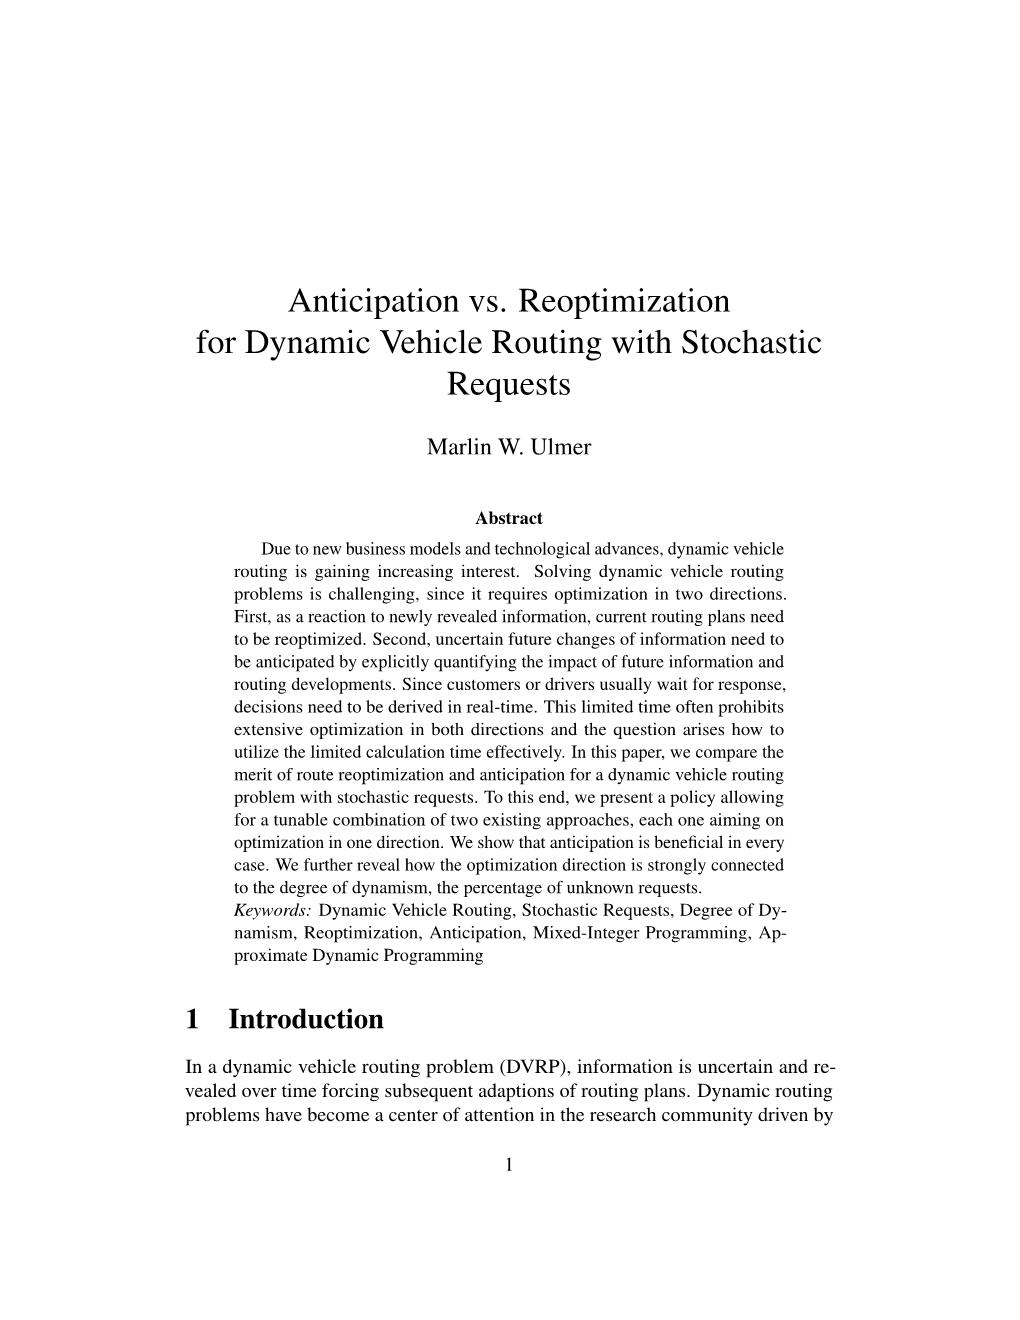 Anticipation Vs. Reoptimization for Dynamic Vehicle Routing with Stochastic Requests